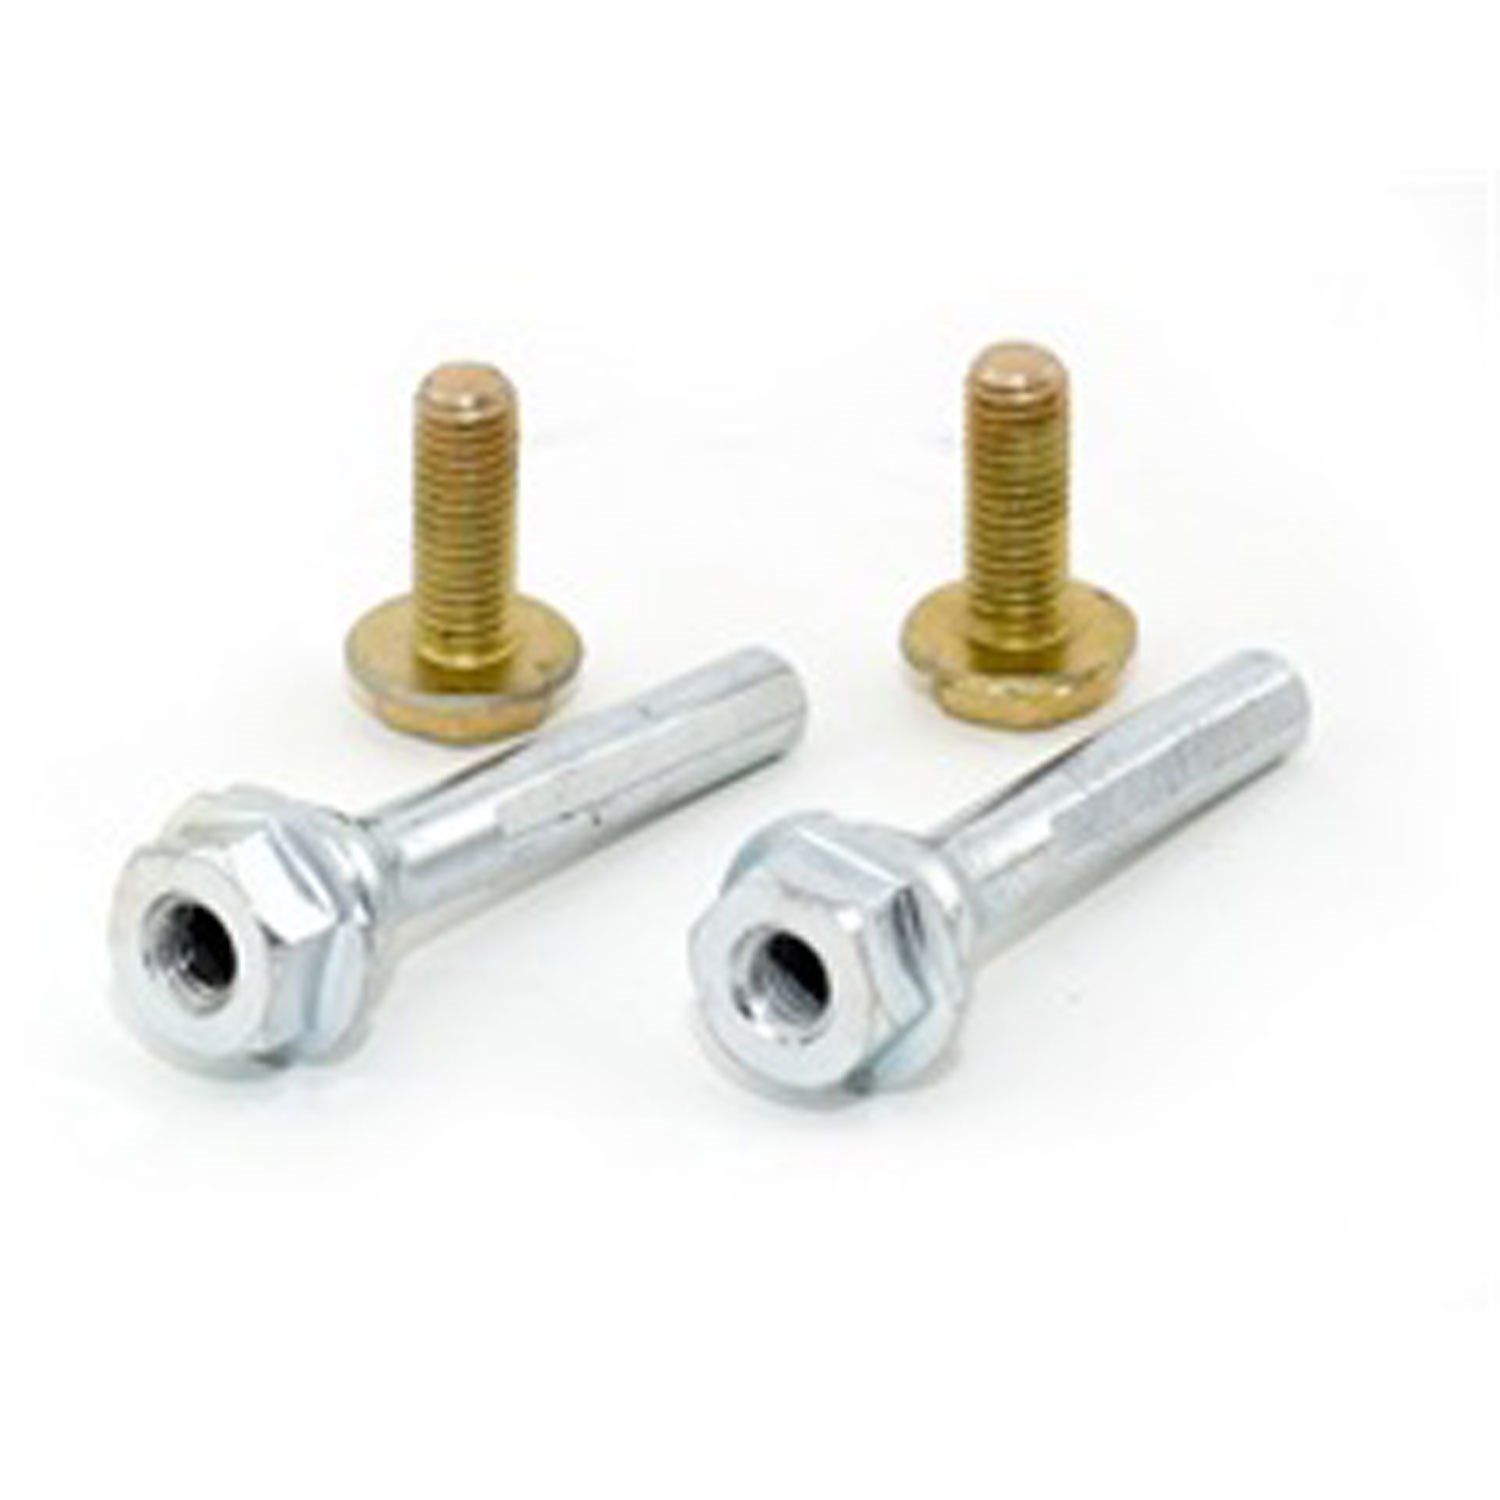 This pair of rear disc Brake caliper pins from Omix-ADA fit 07-16 Jeep Wranglers and 08-13 Libertys.